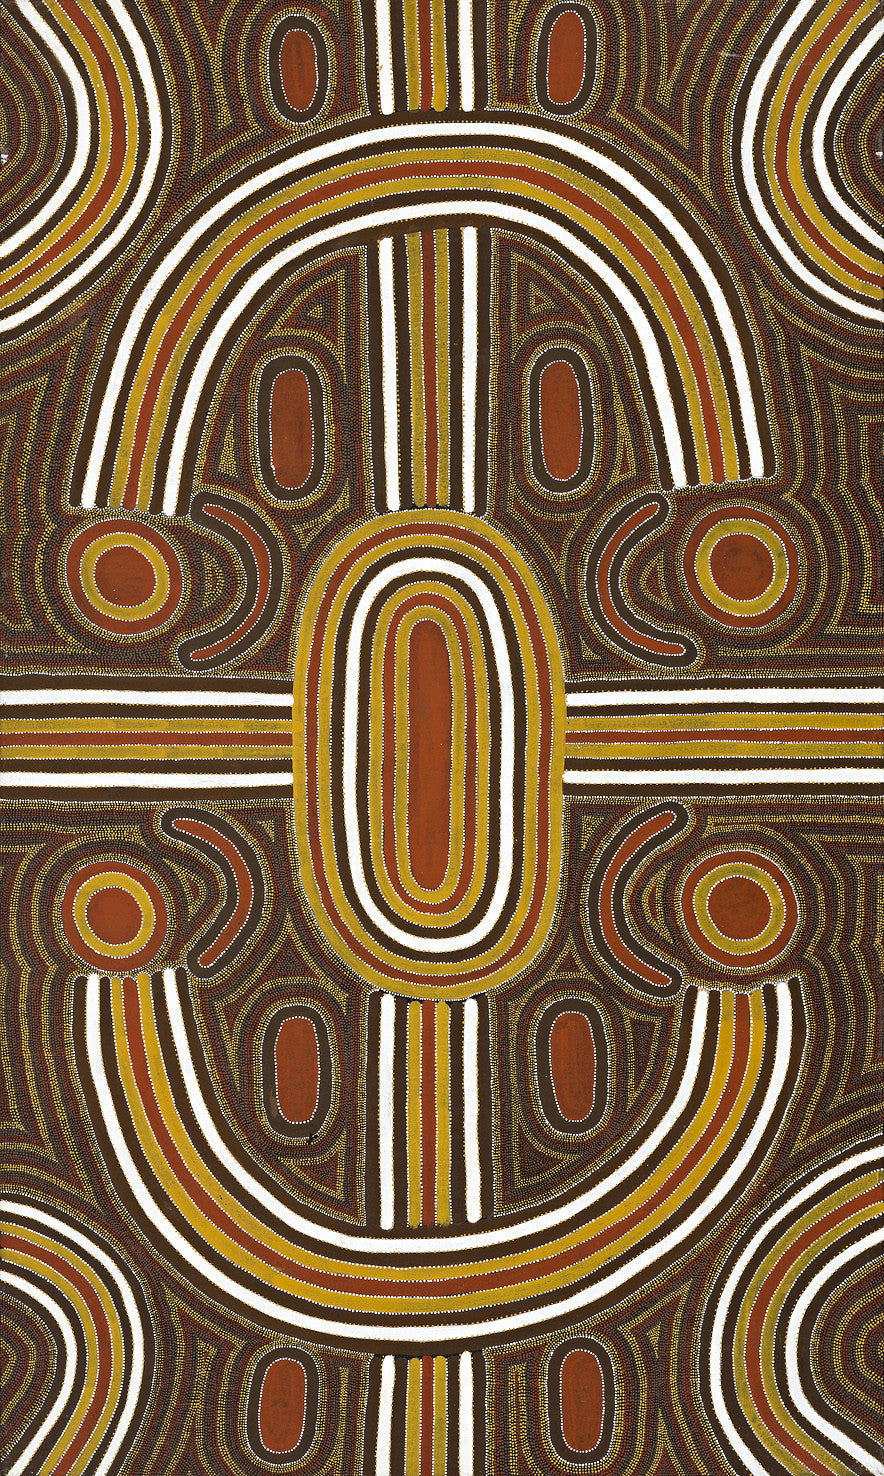 Louie Pwerle, Painting 97B002, 1997, 91x153cm - Delmore Gallery